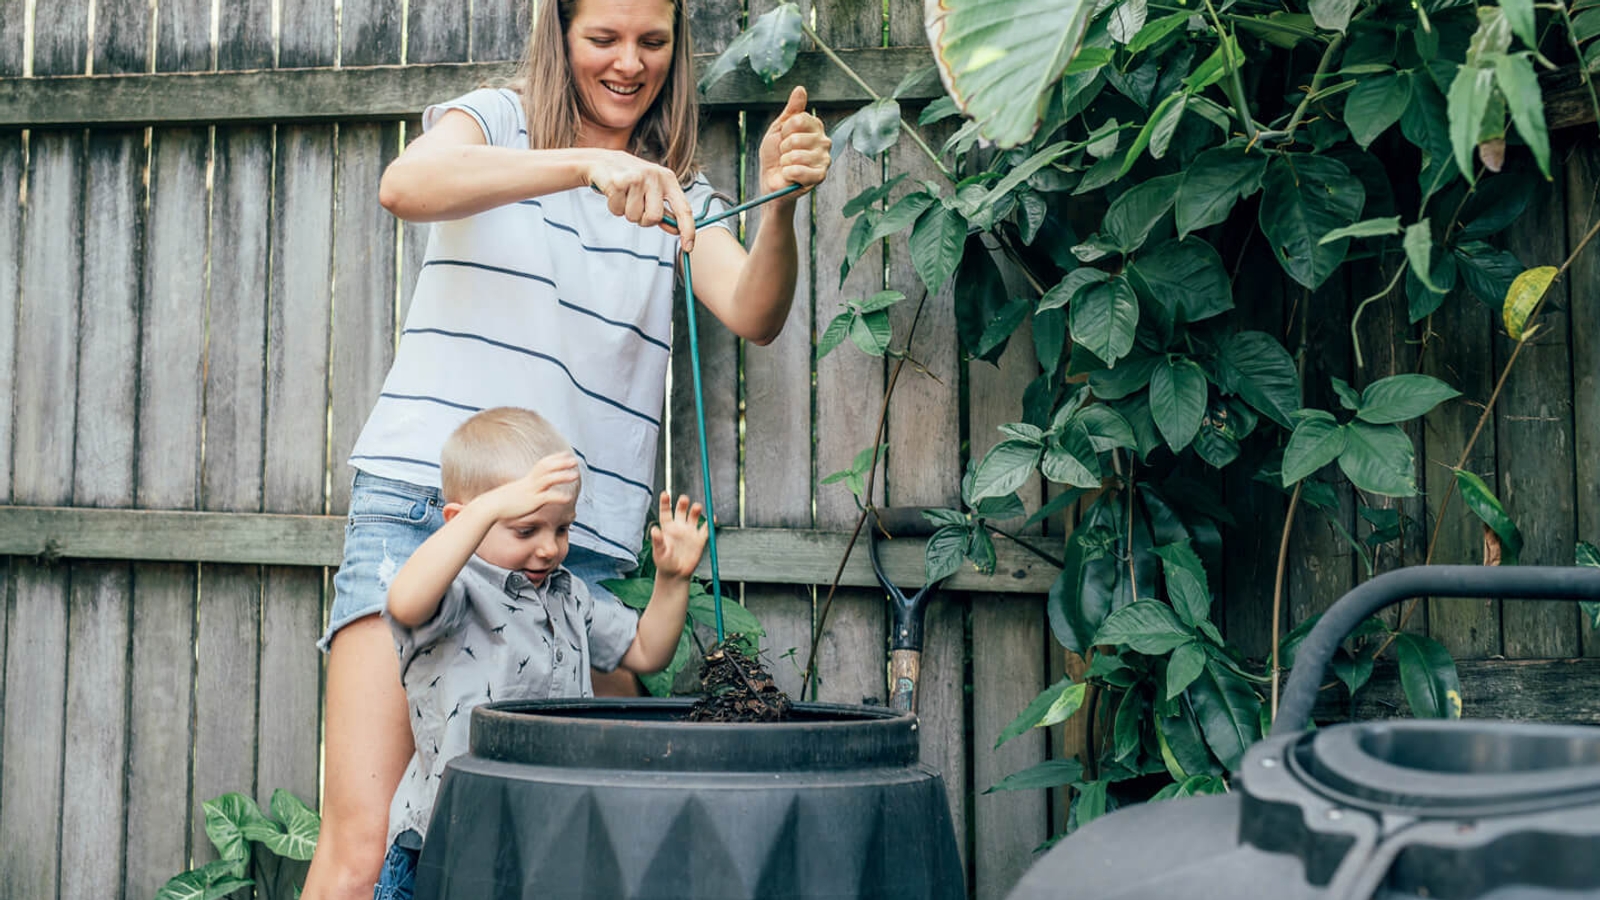 A woman and a young child are engaged in composting activities with a black compost bin in a home garden setting